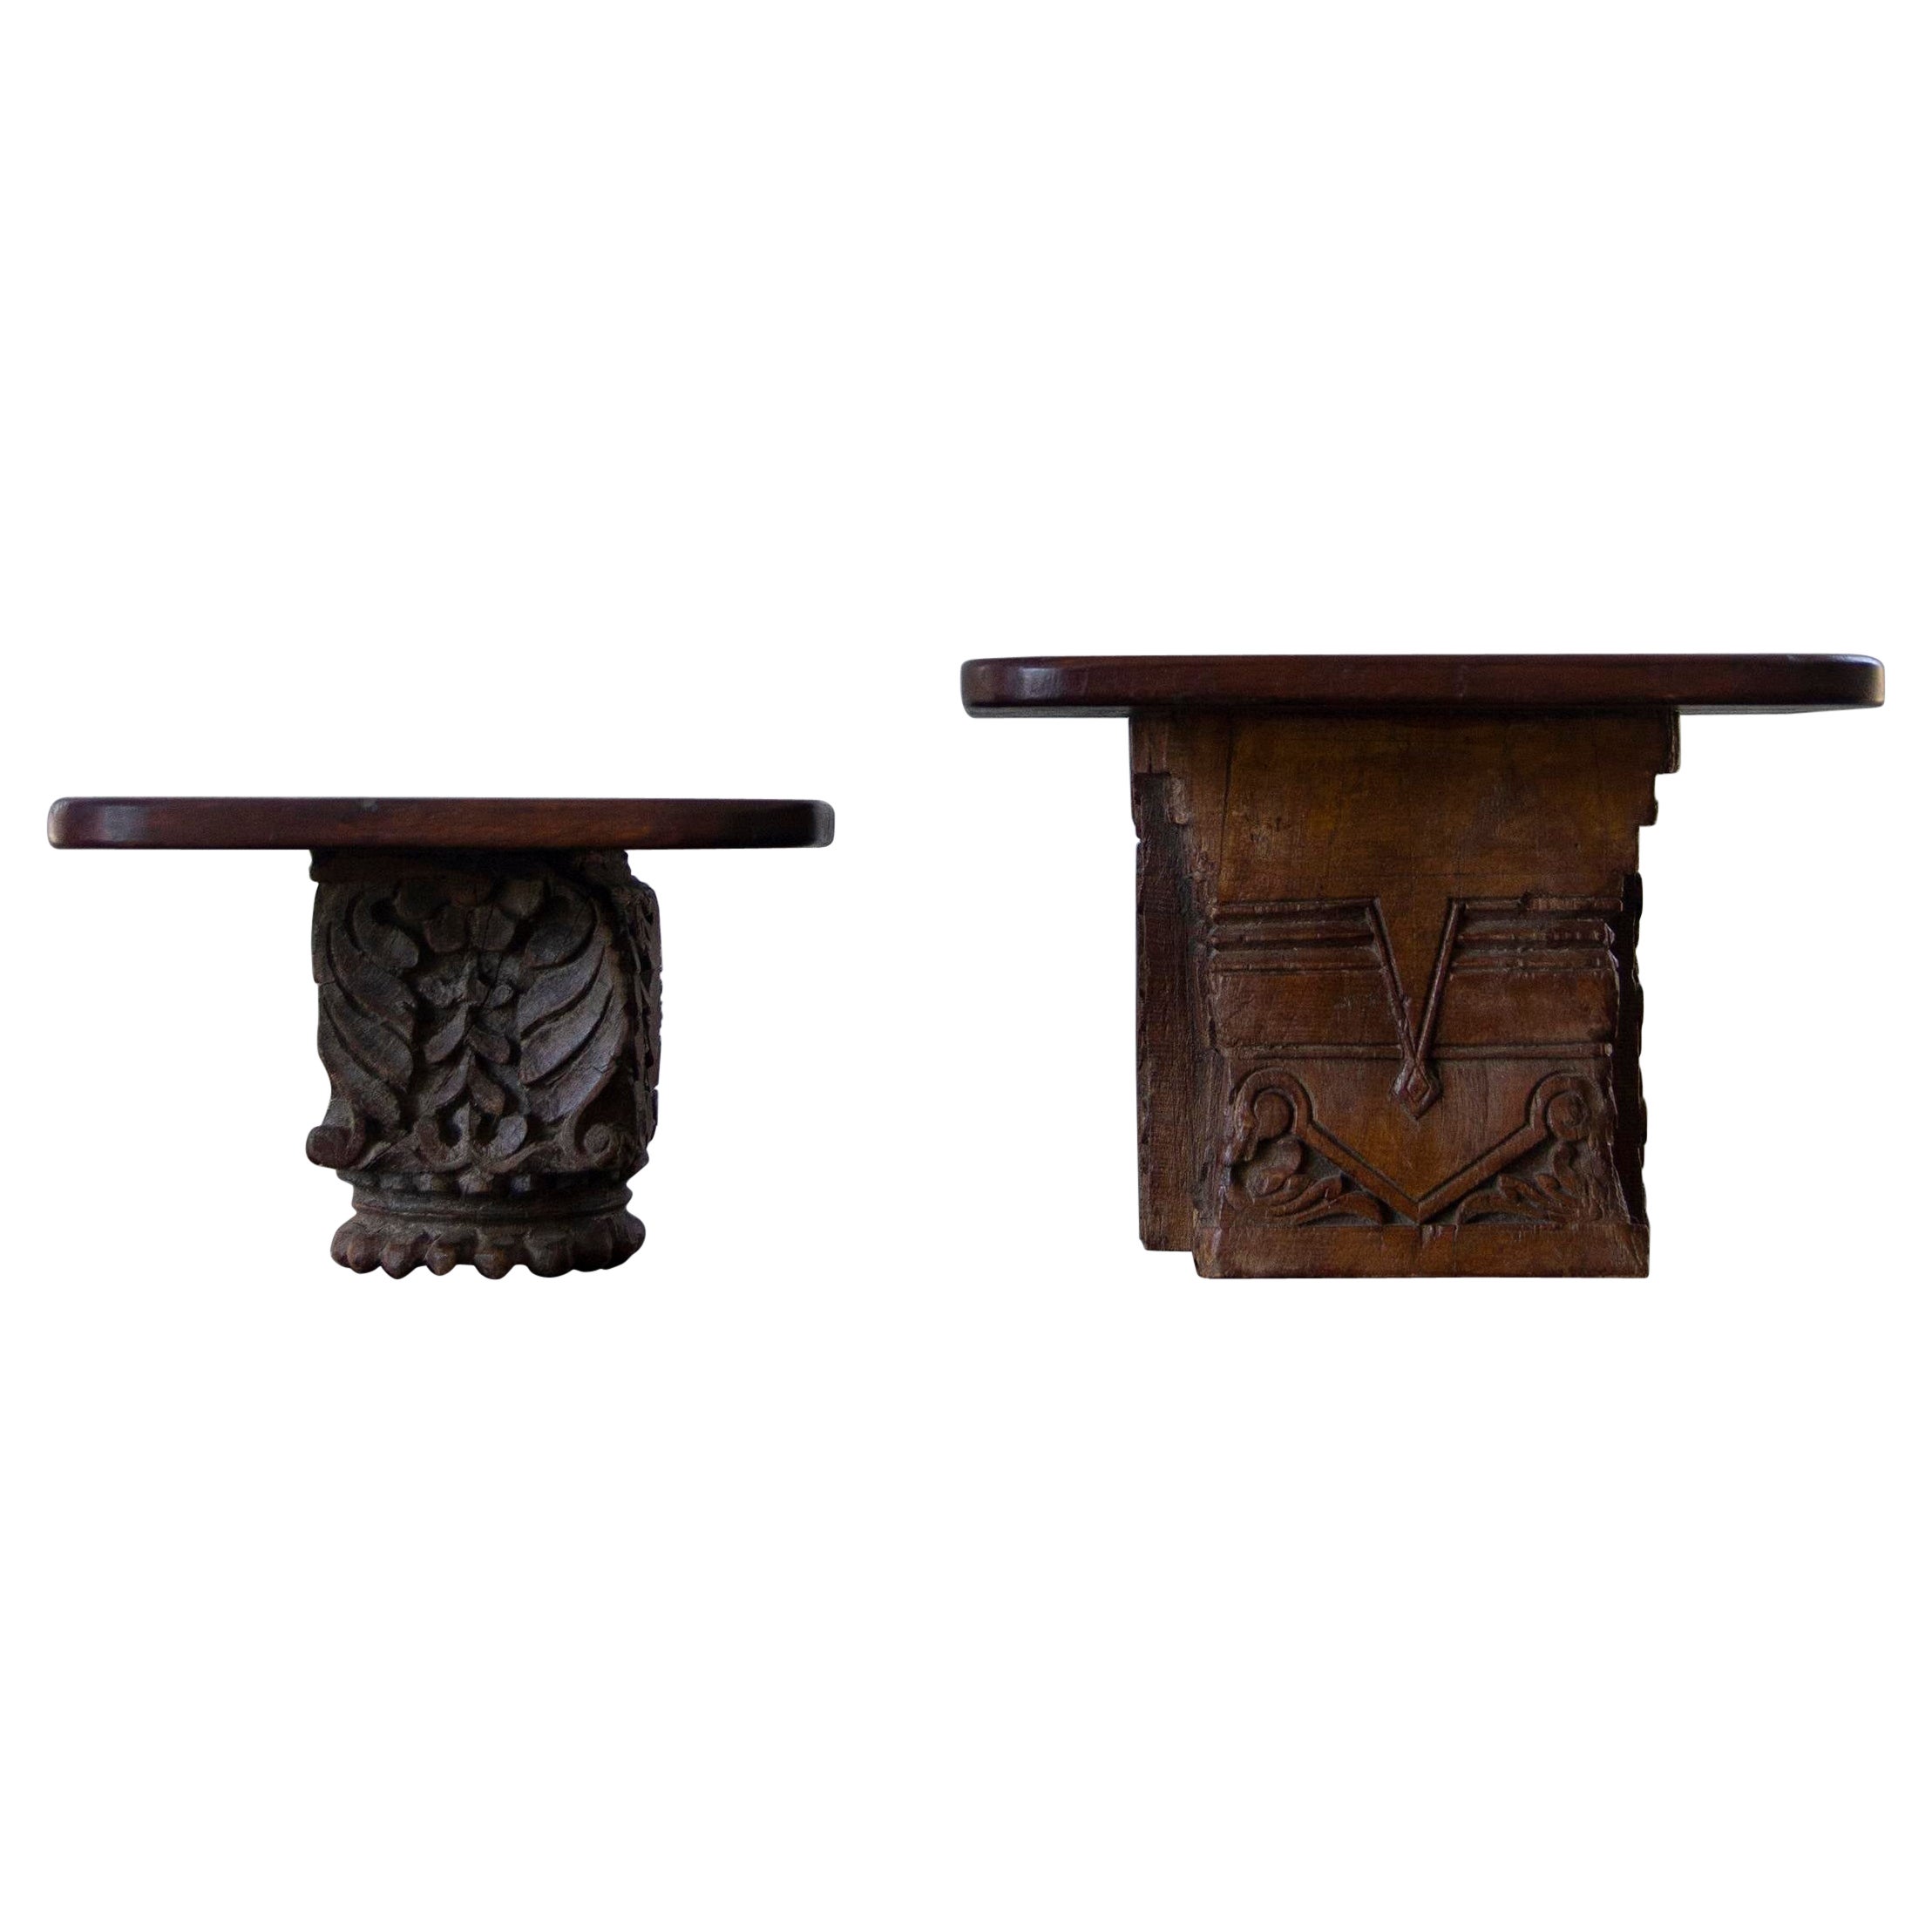 Late 20th Century Indian Hand-Carved Wood Wall Shelf, a Pair For Sale